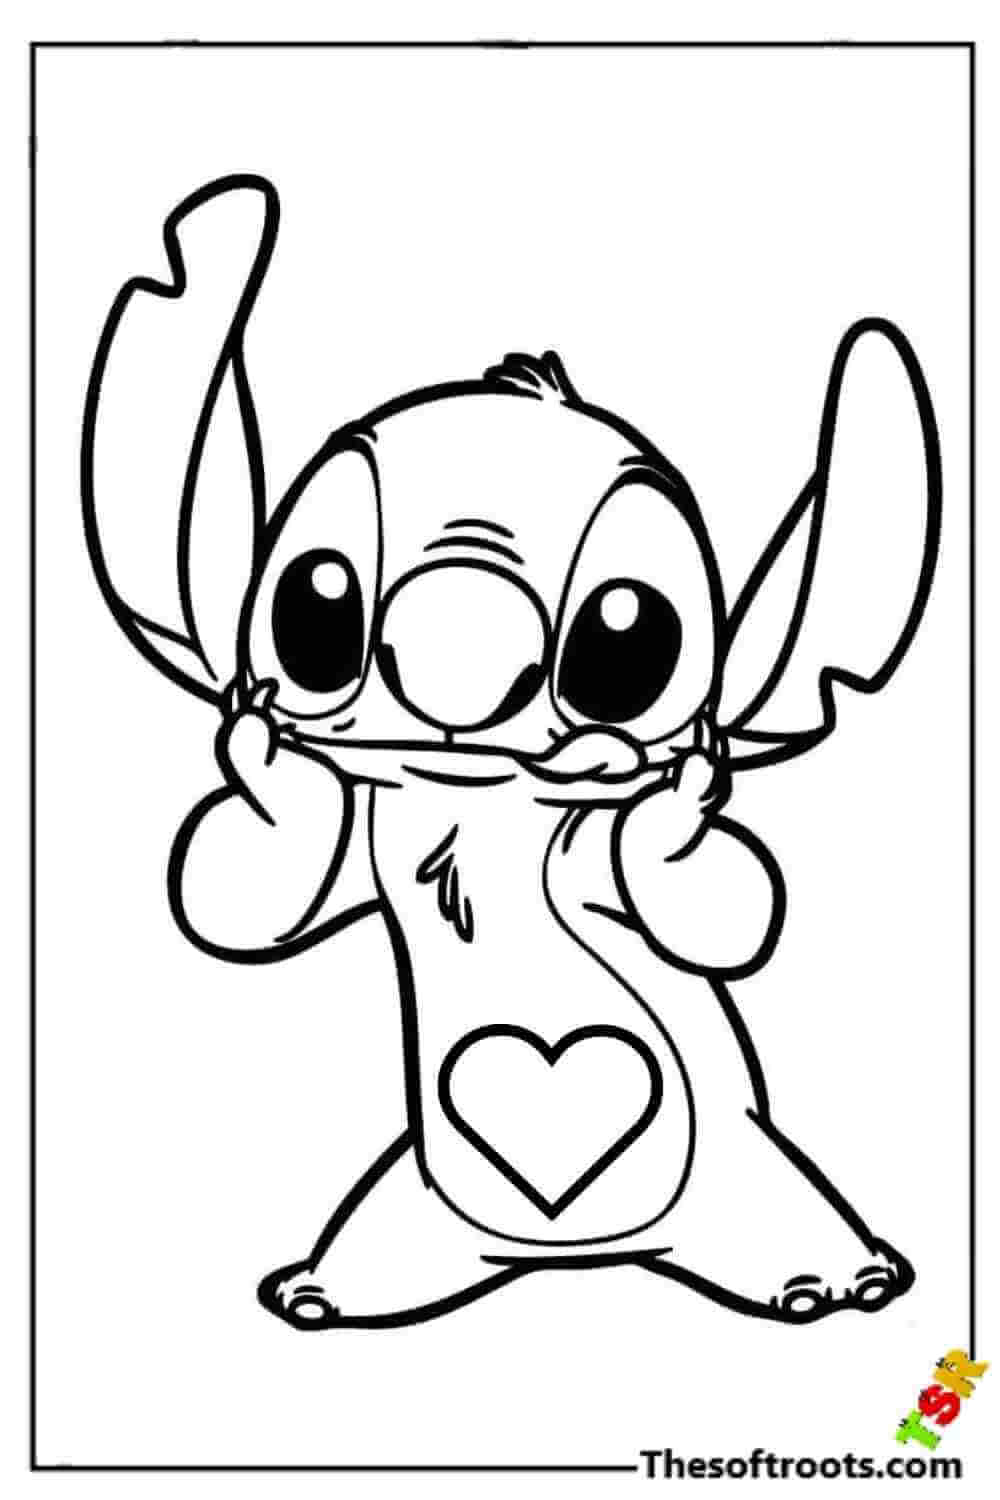 Stitch coloring pages for kids